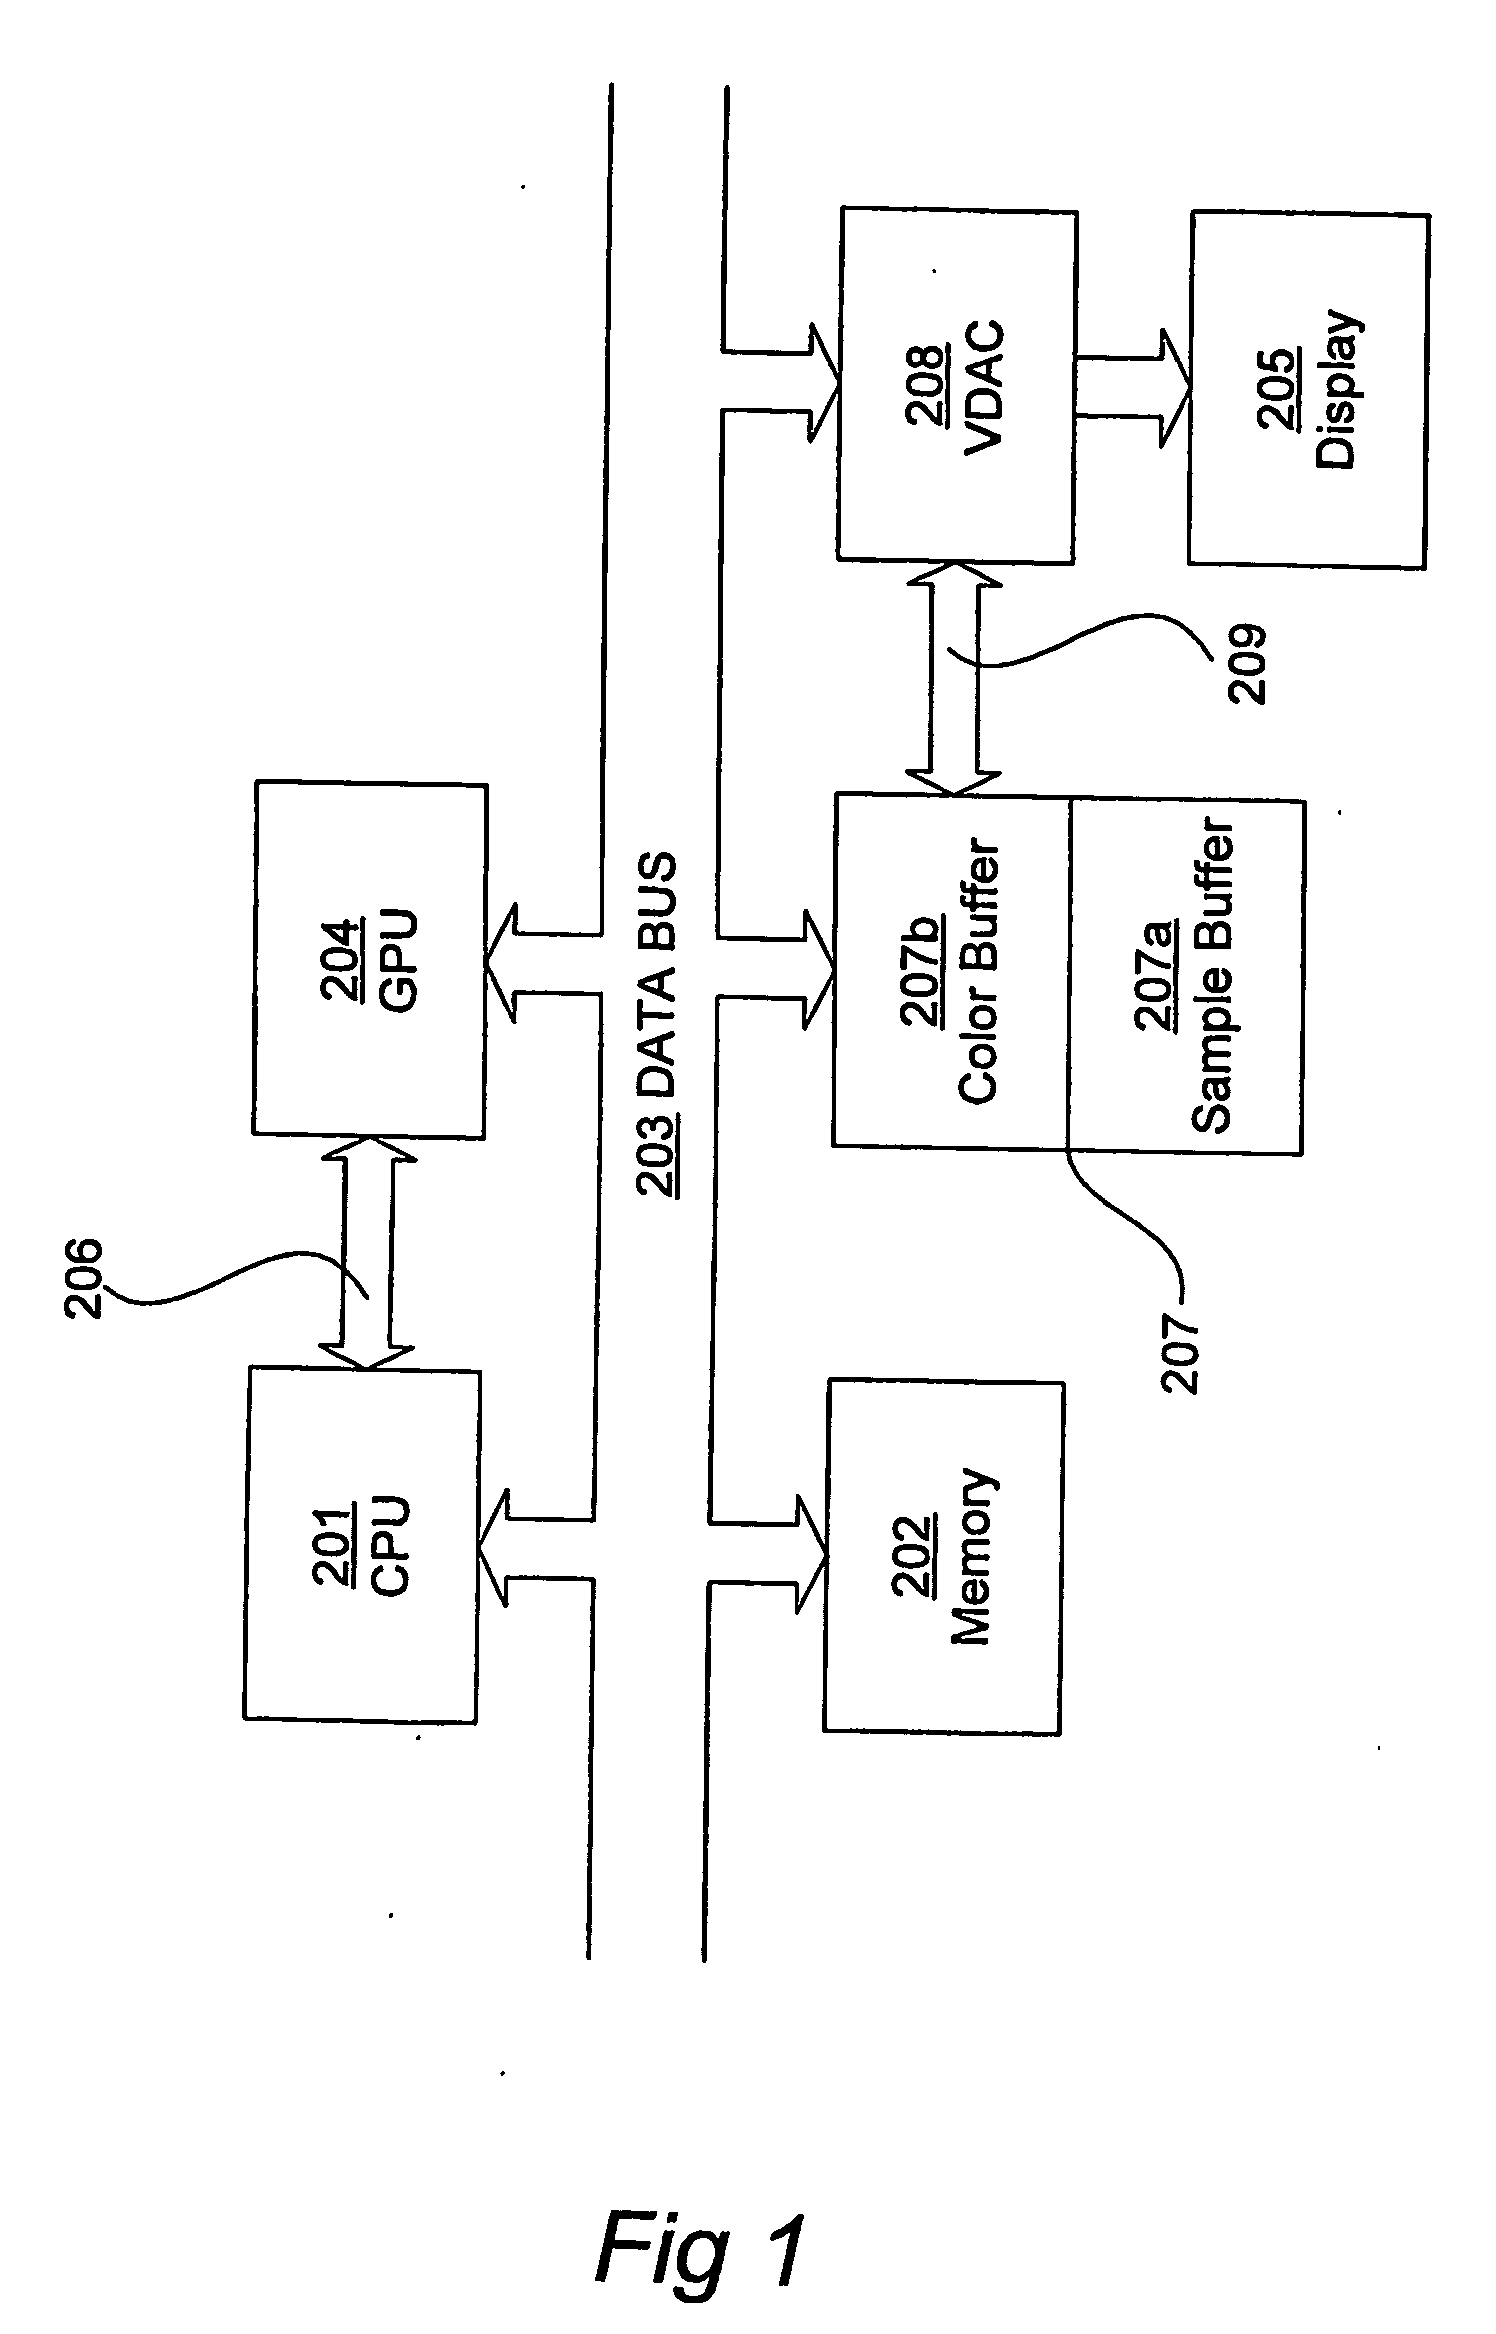 Method and system for supersampling rasterization of image data